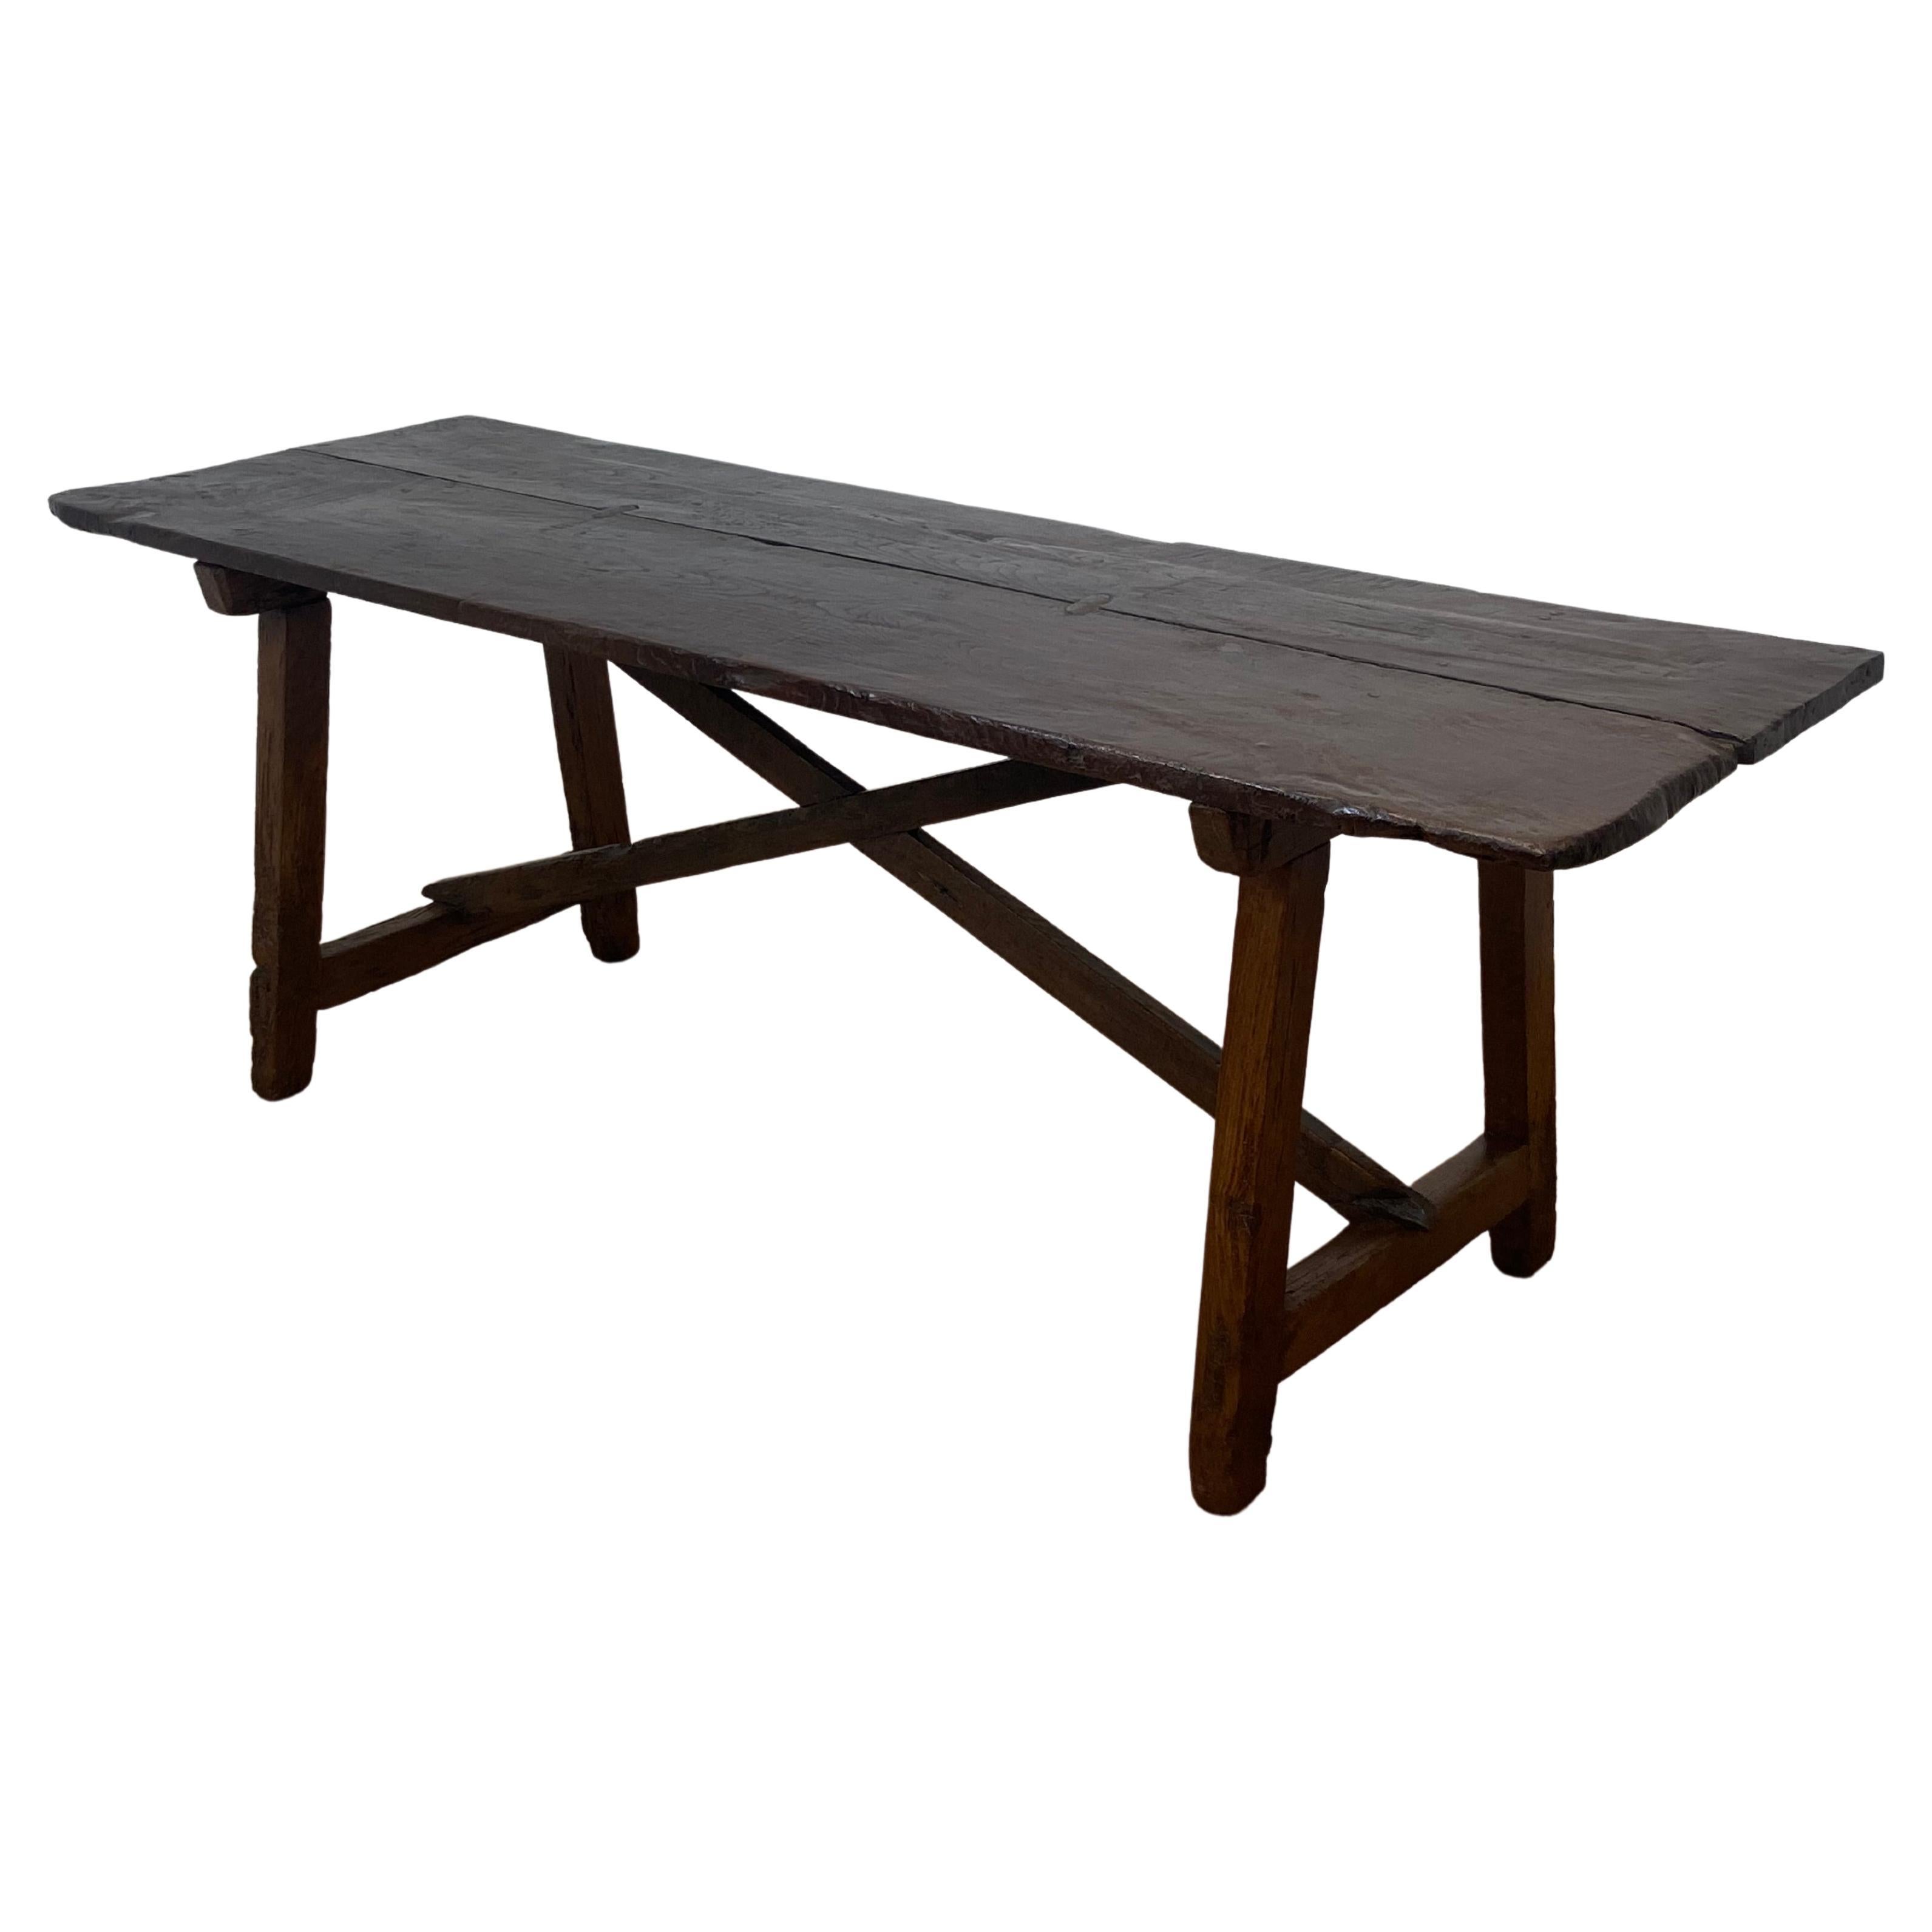 Rustic and Brutalist Spanish Farm Table